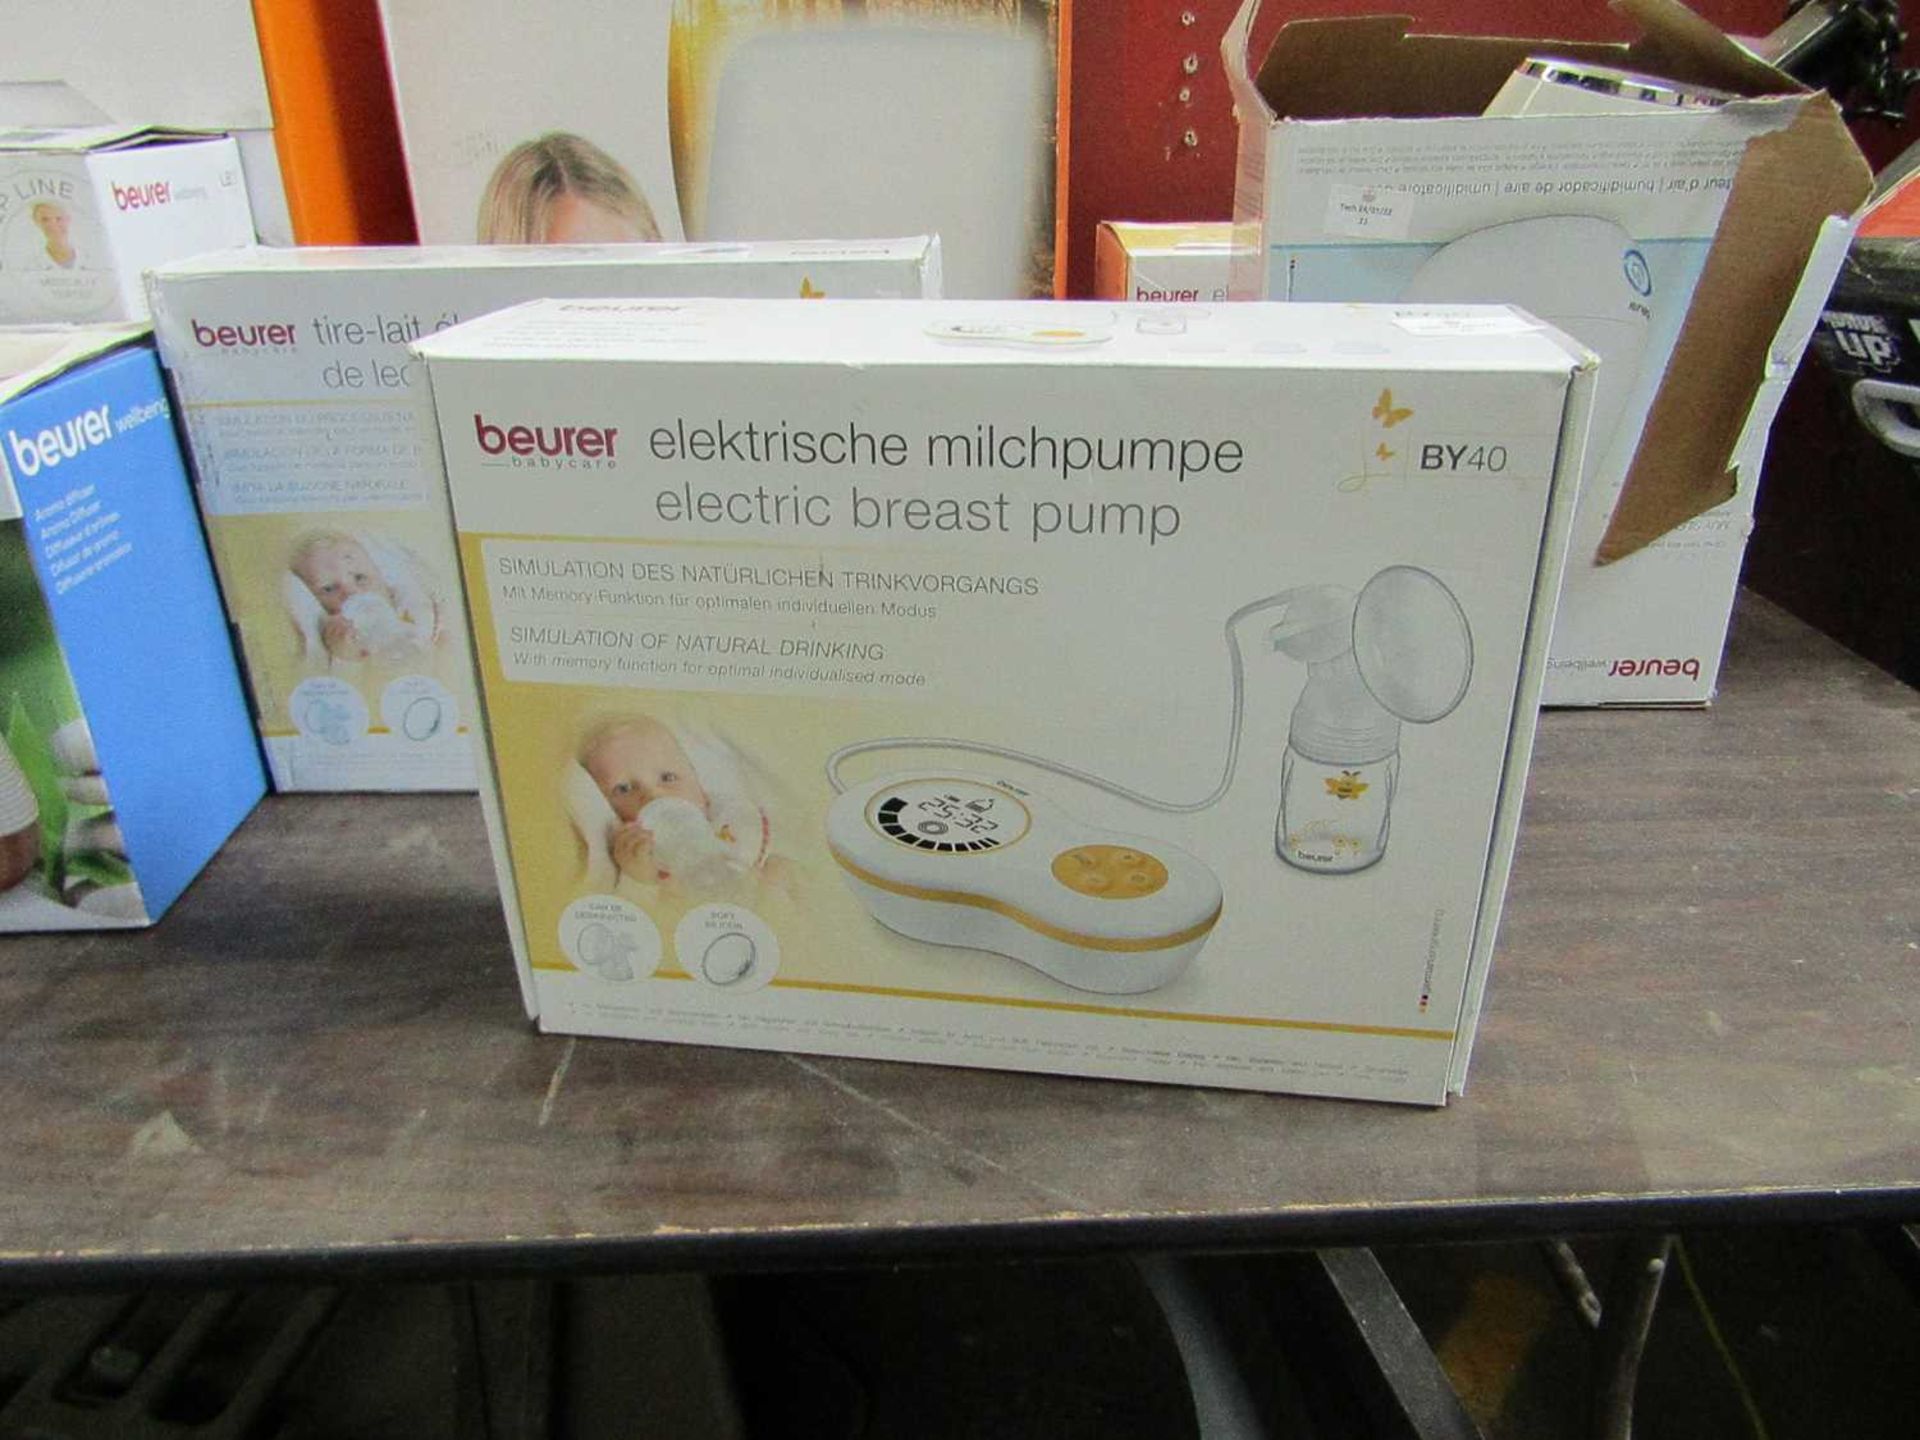 VAT 1x Beurer Electric Breast Pump BY40 - This item is graded B - RRP œ78